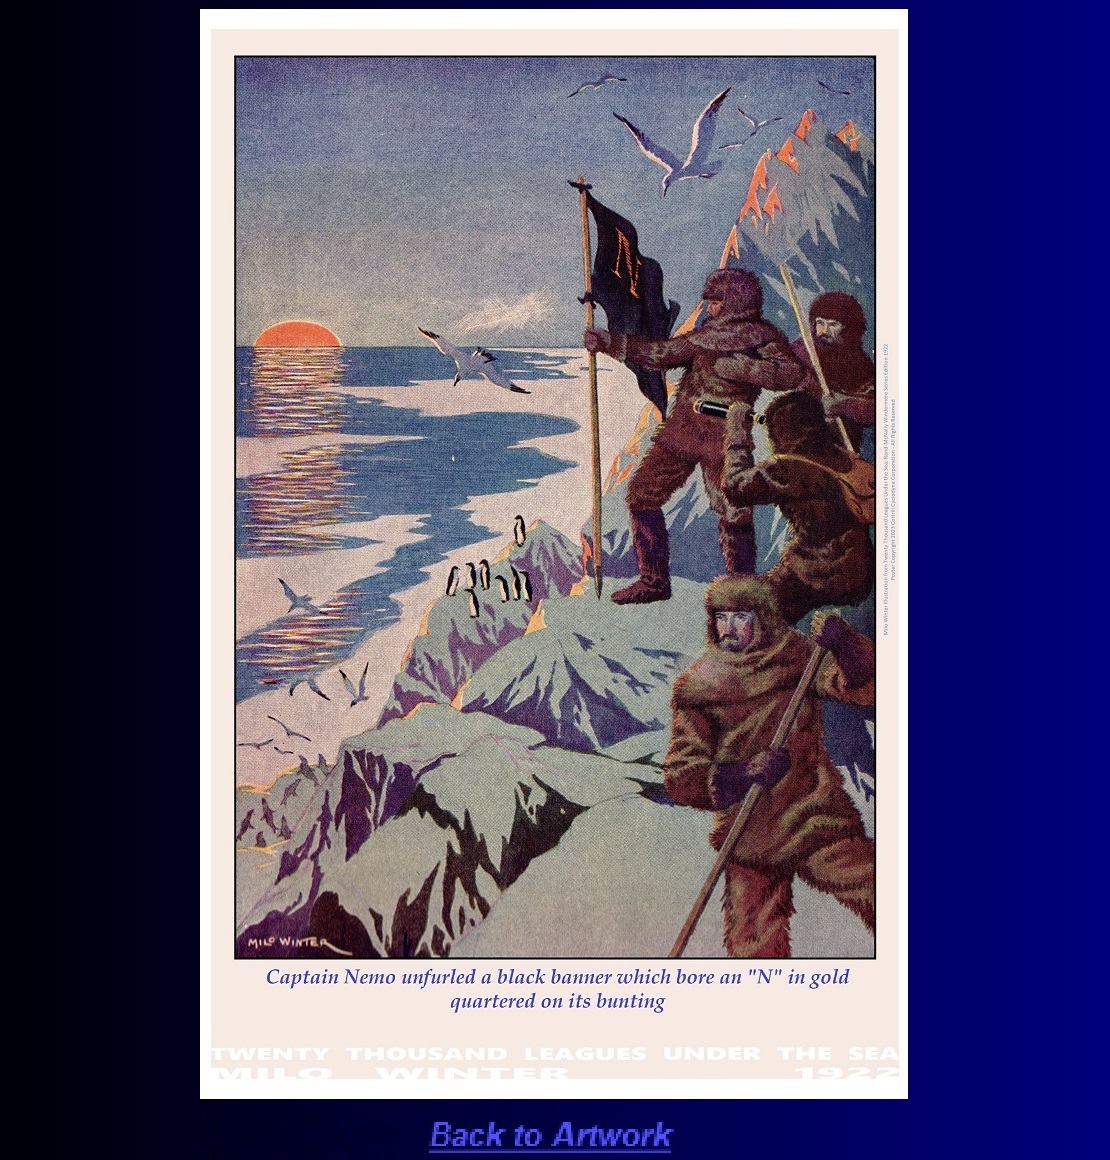 Portrait poster: Captain Nemo unfurled a black banner which bore an N by Milo Winter